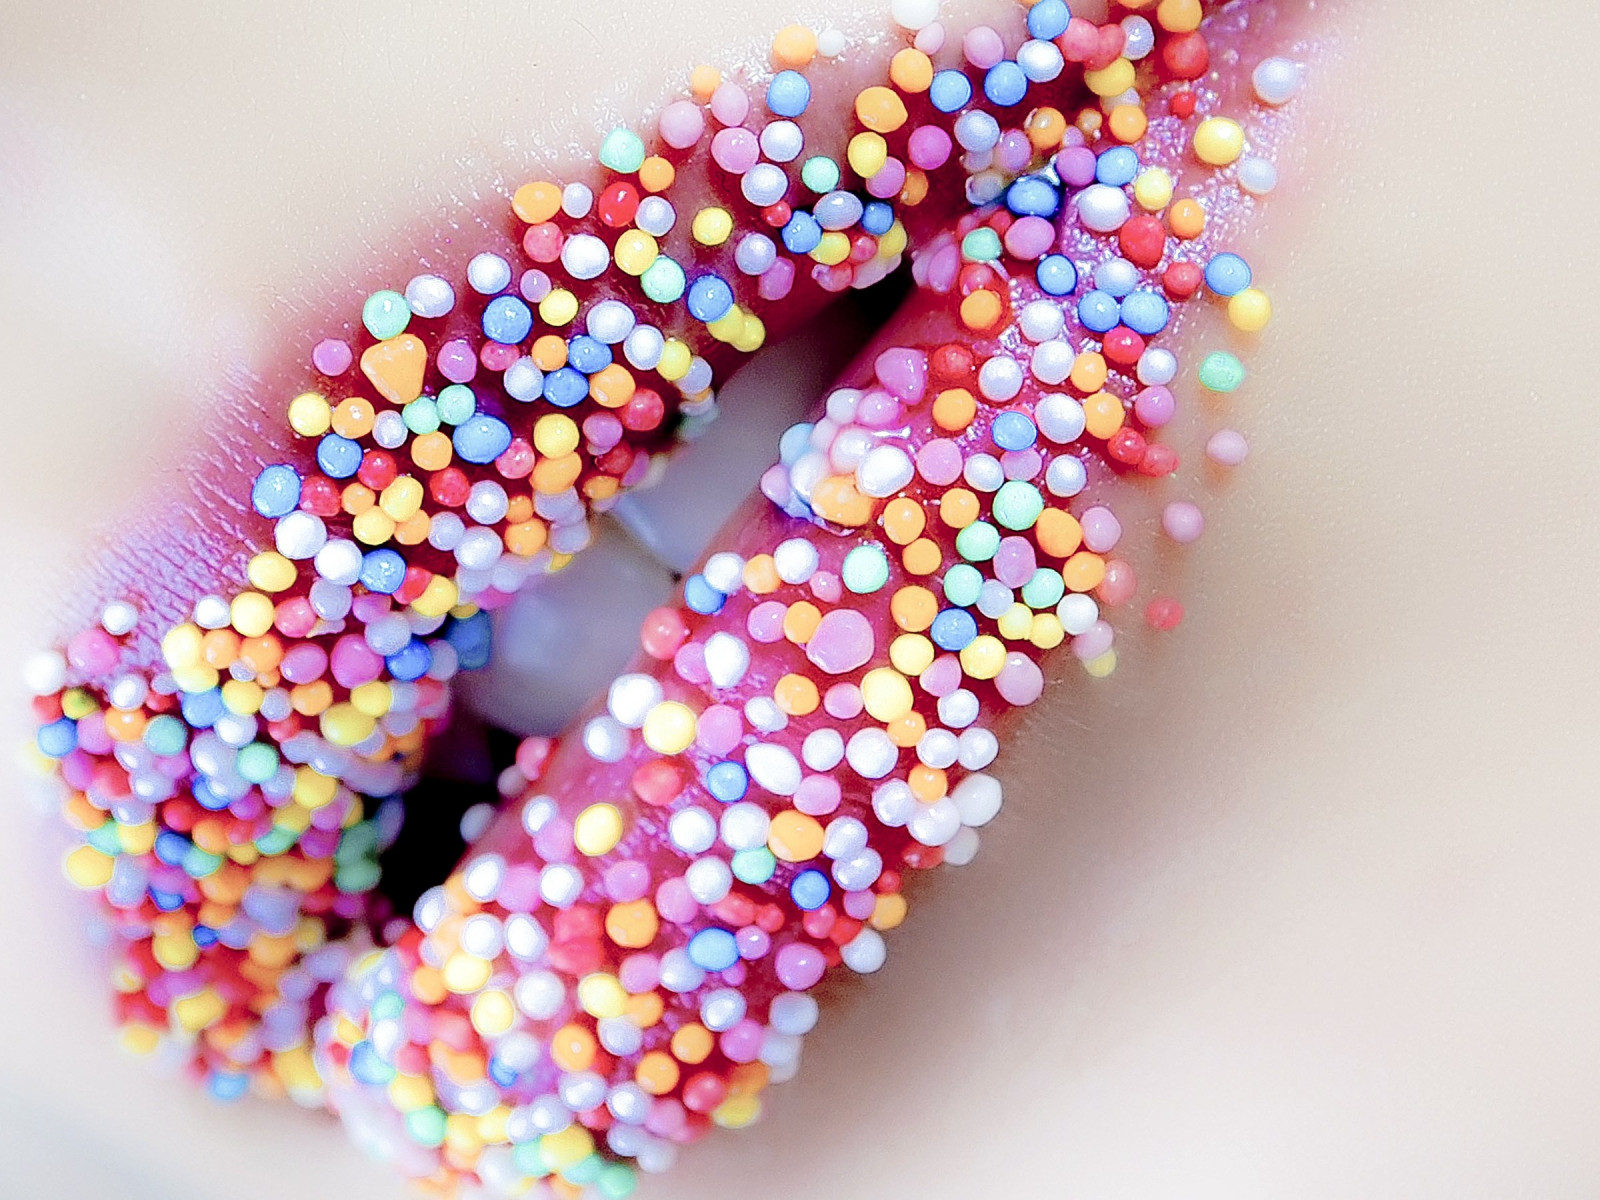 Lips with sweets wallpaper 1600x1200